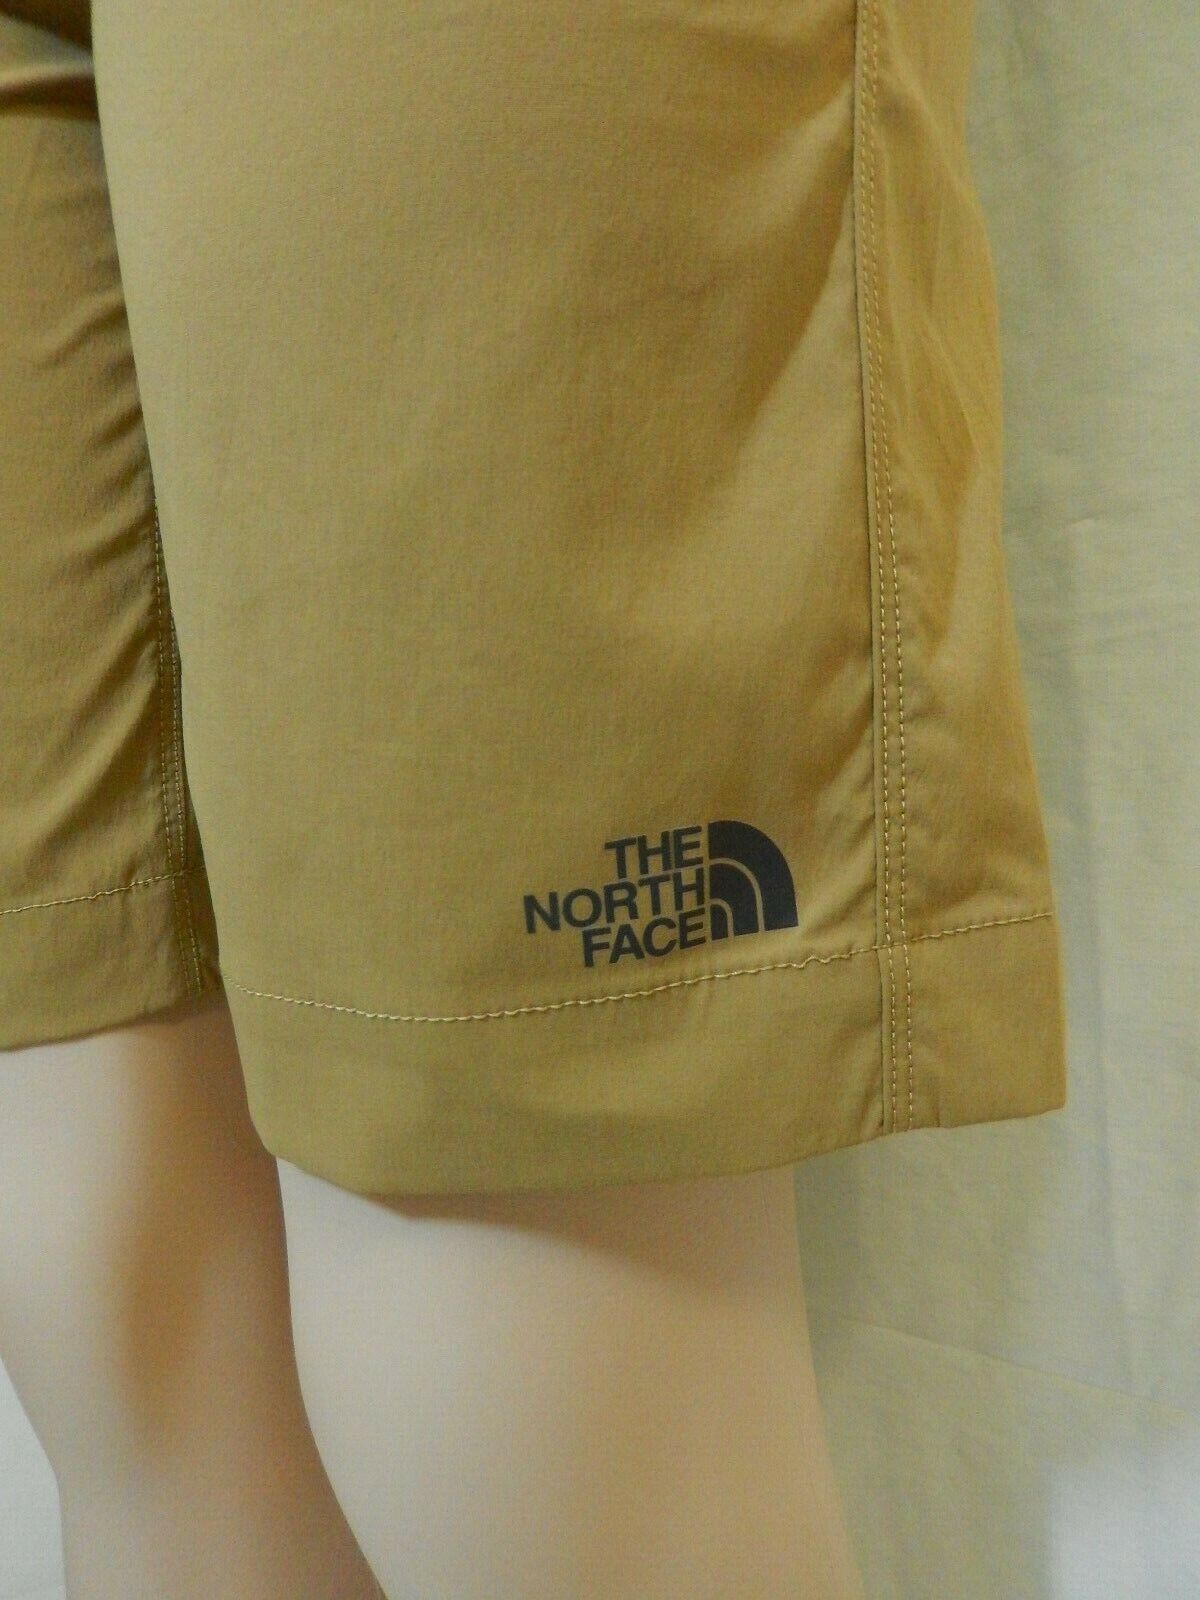 *NWT* THE NORTH FACE YOUTH BOYS TAN NYLON HIKING SPUR TRAIL SHORTS SIZE S(7/8)